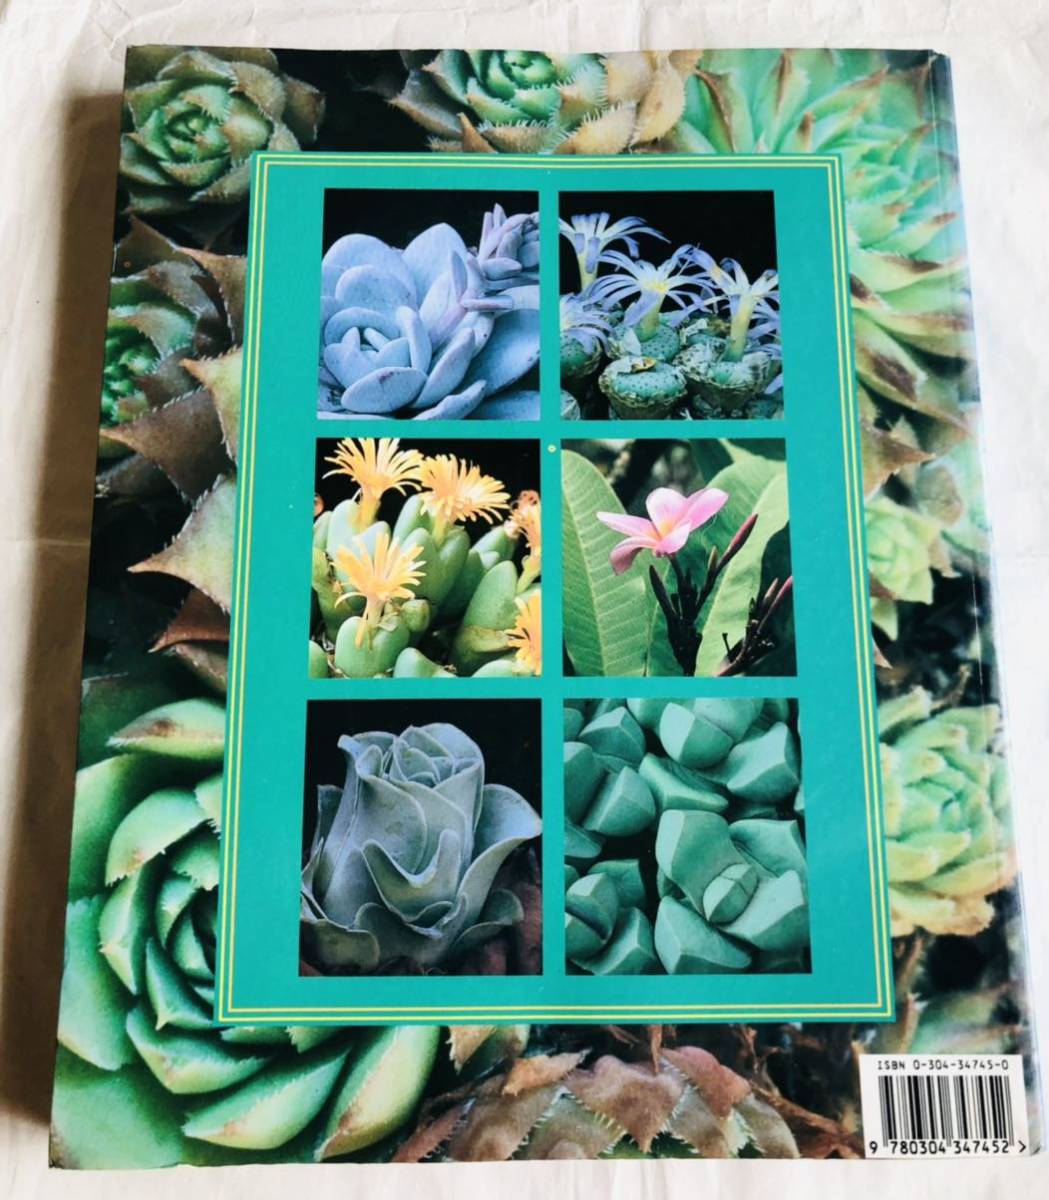 [ foreign book ]Succulents The Illustrated Dictionary / succulent plant cactus. illustrated reference book 